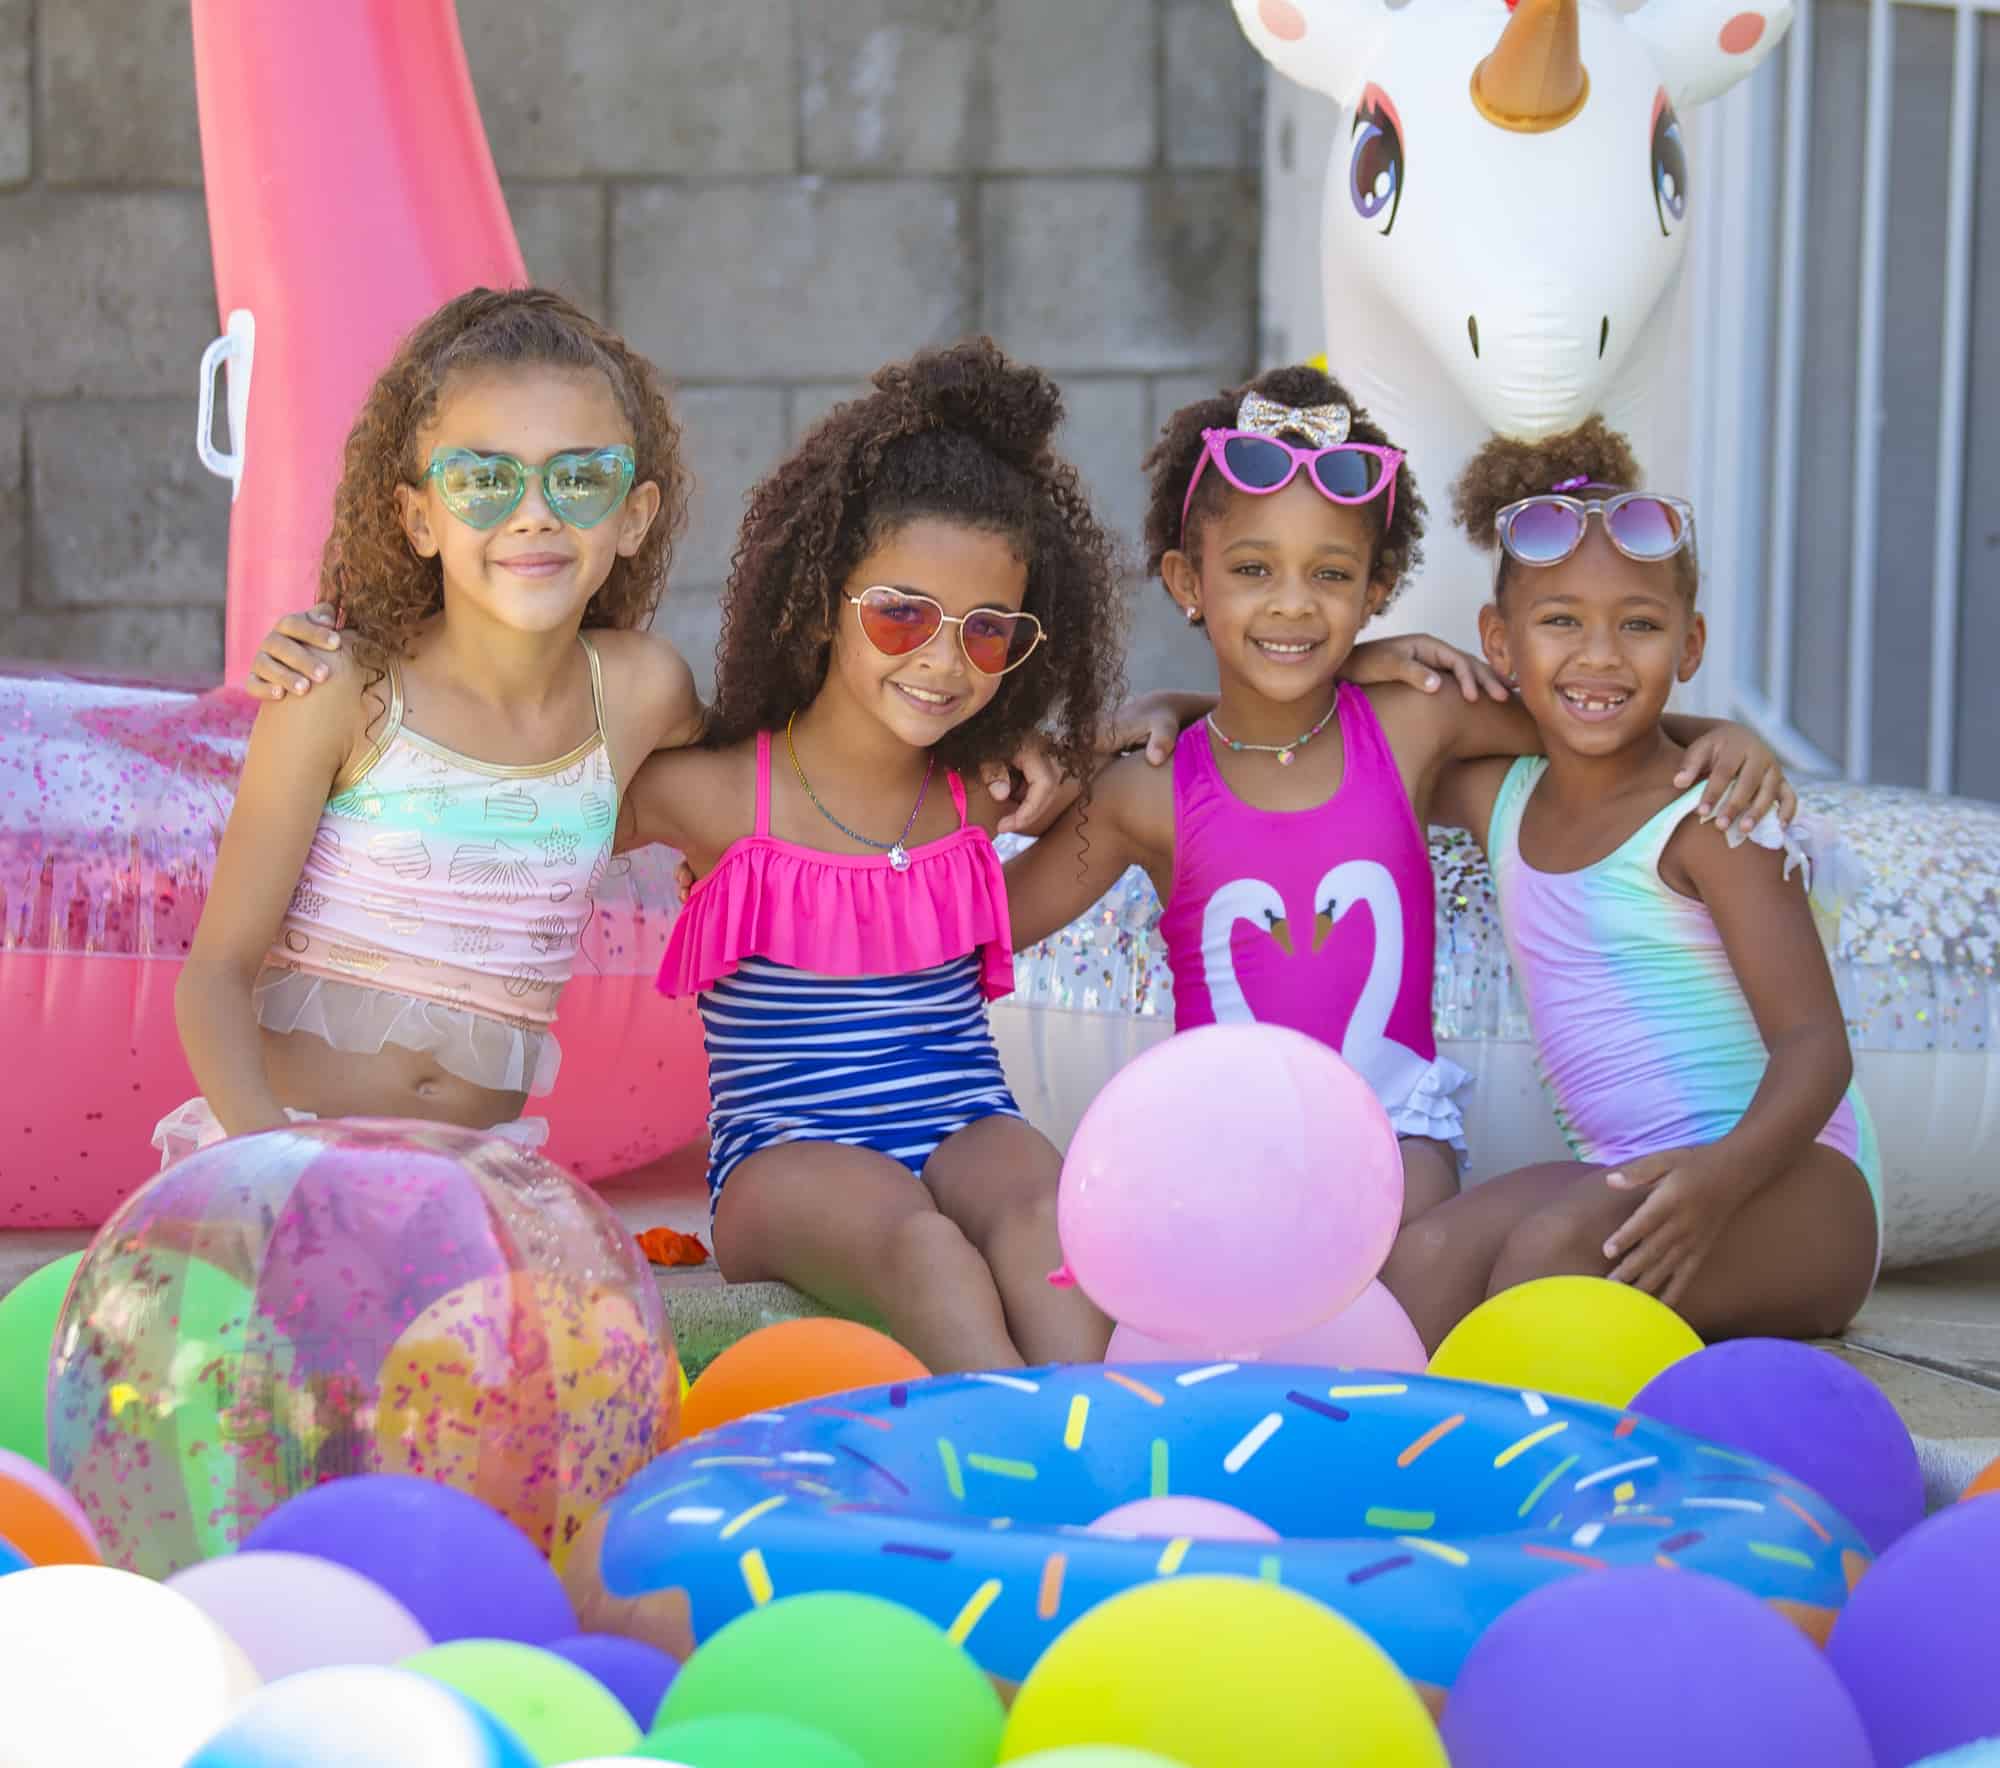 4 young girls of color in bathing suits surrounded by balloons and pool toys at a pool party.